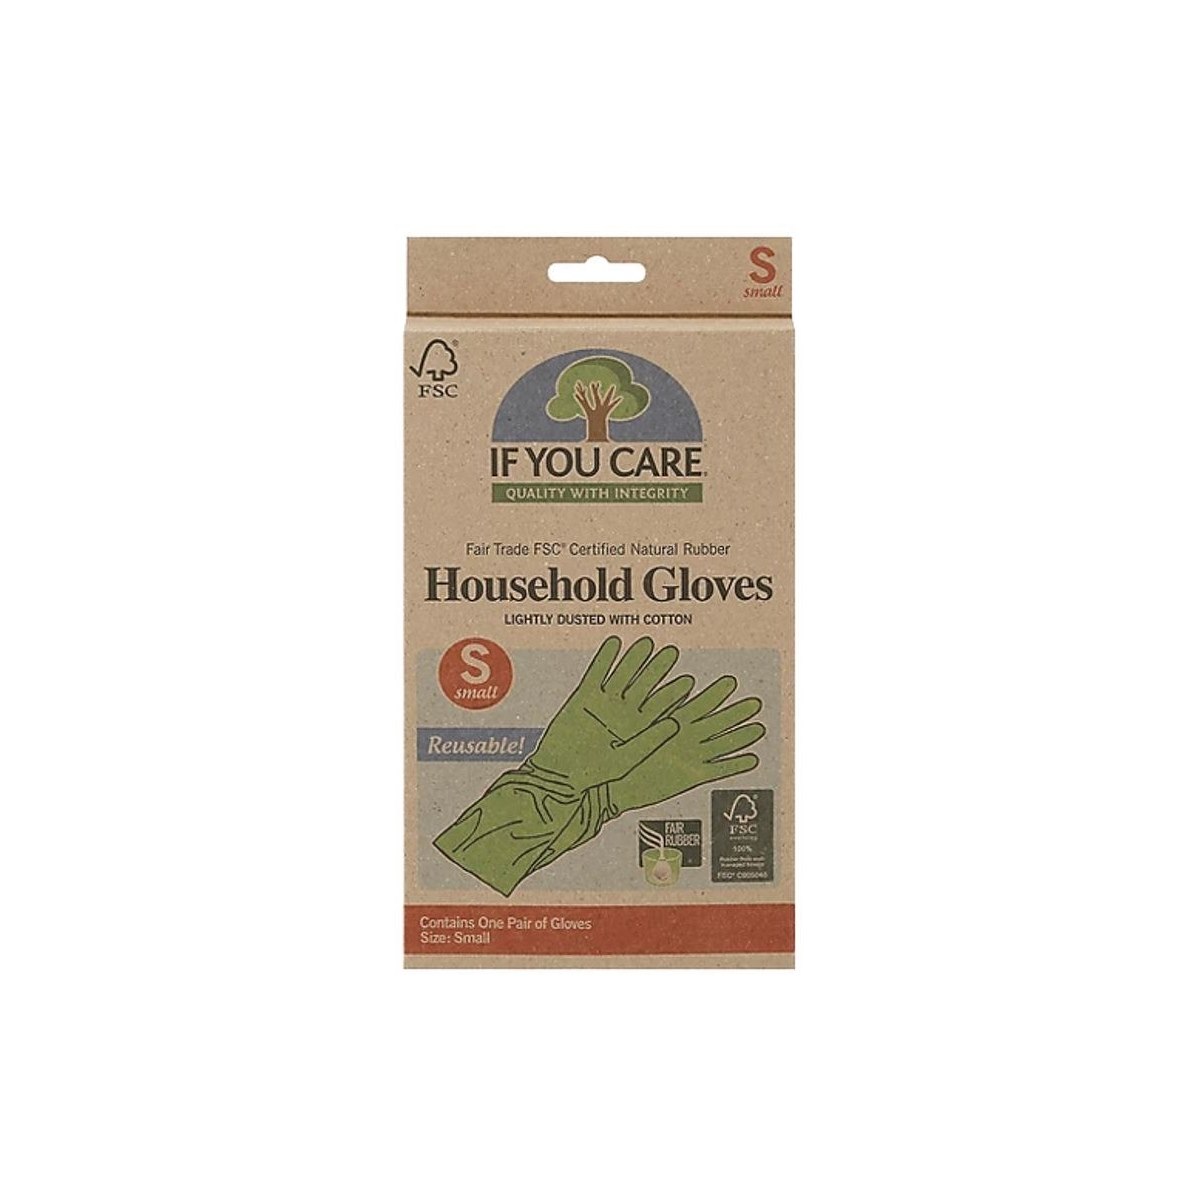 Where-to-buy-eco-friendly-cleaning-gloves